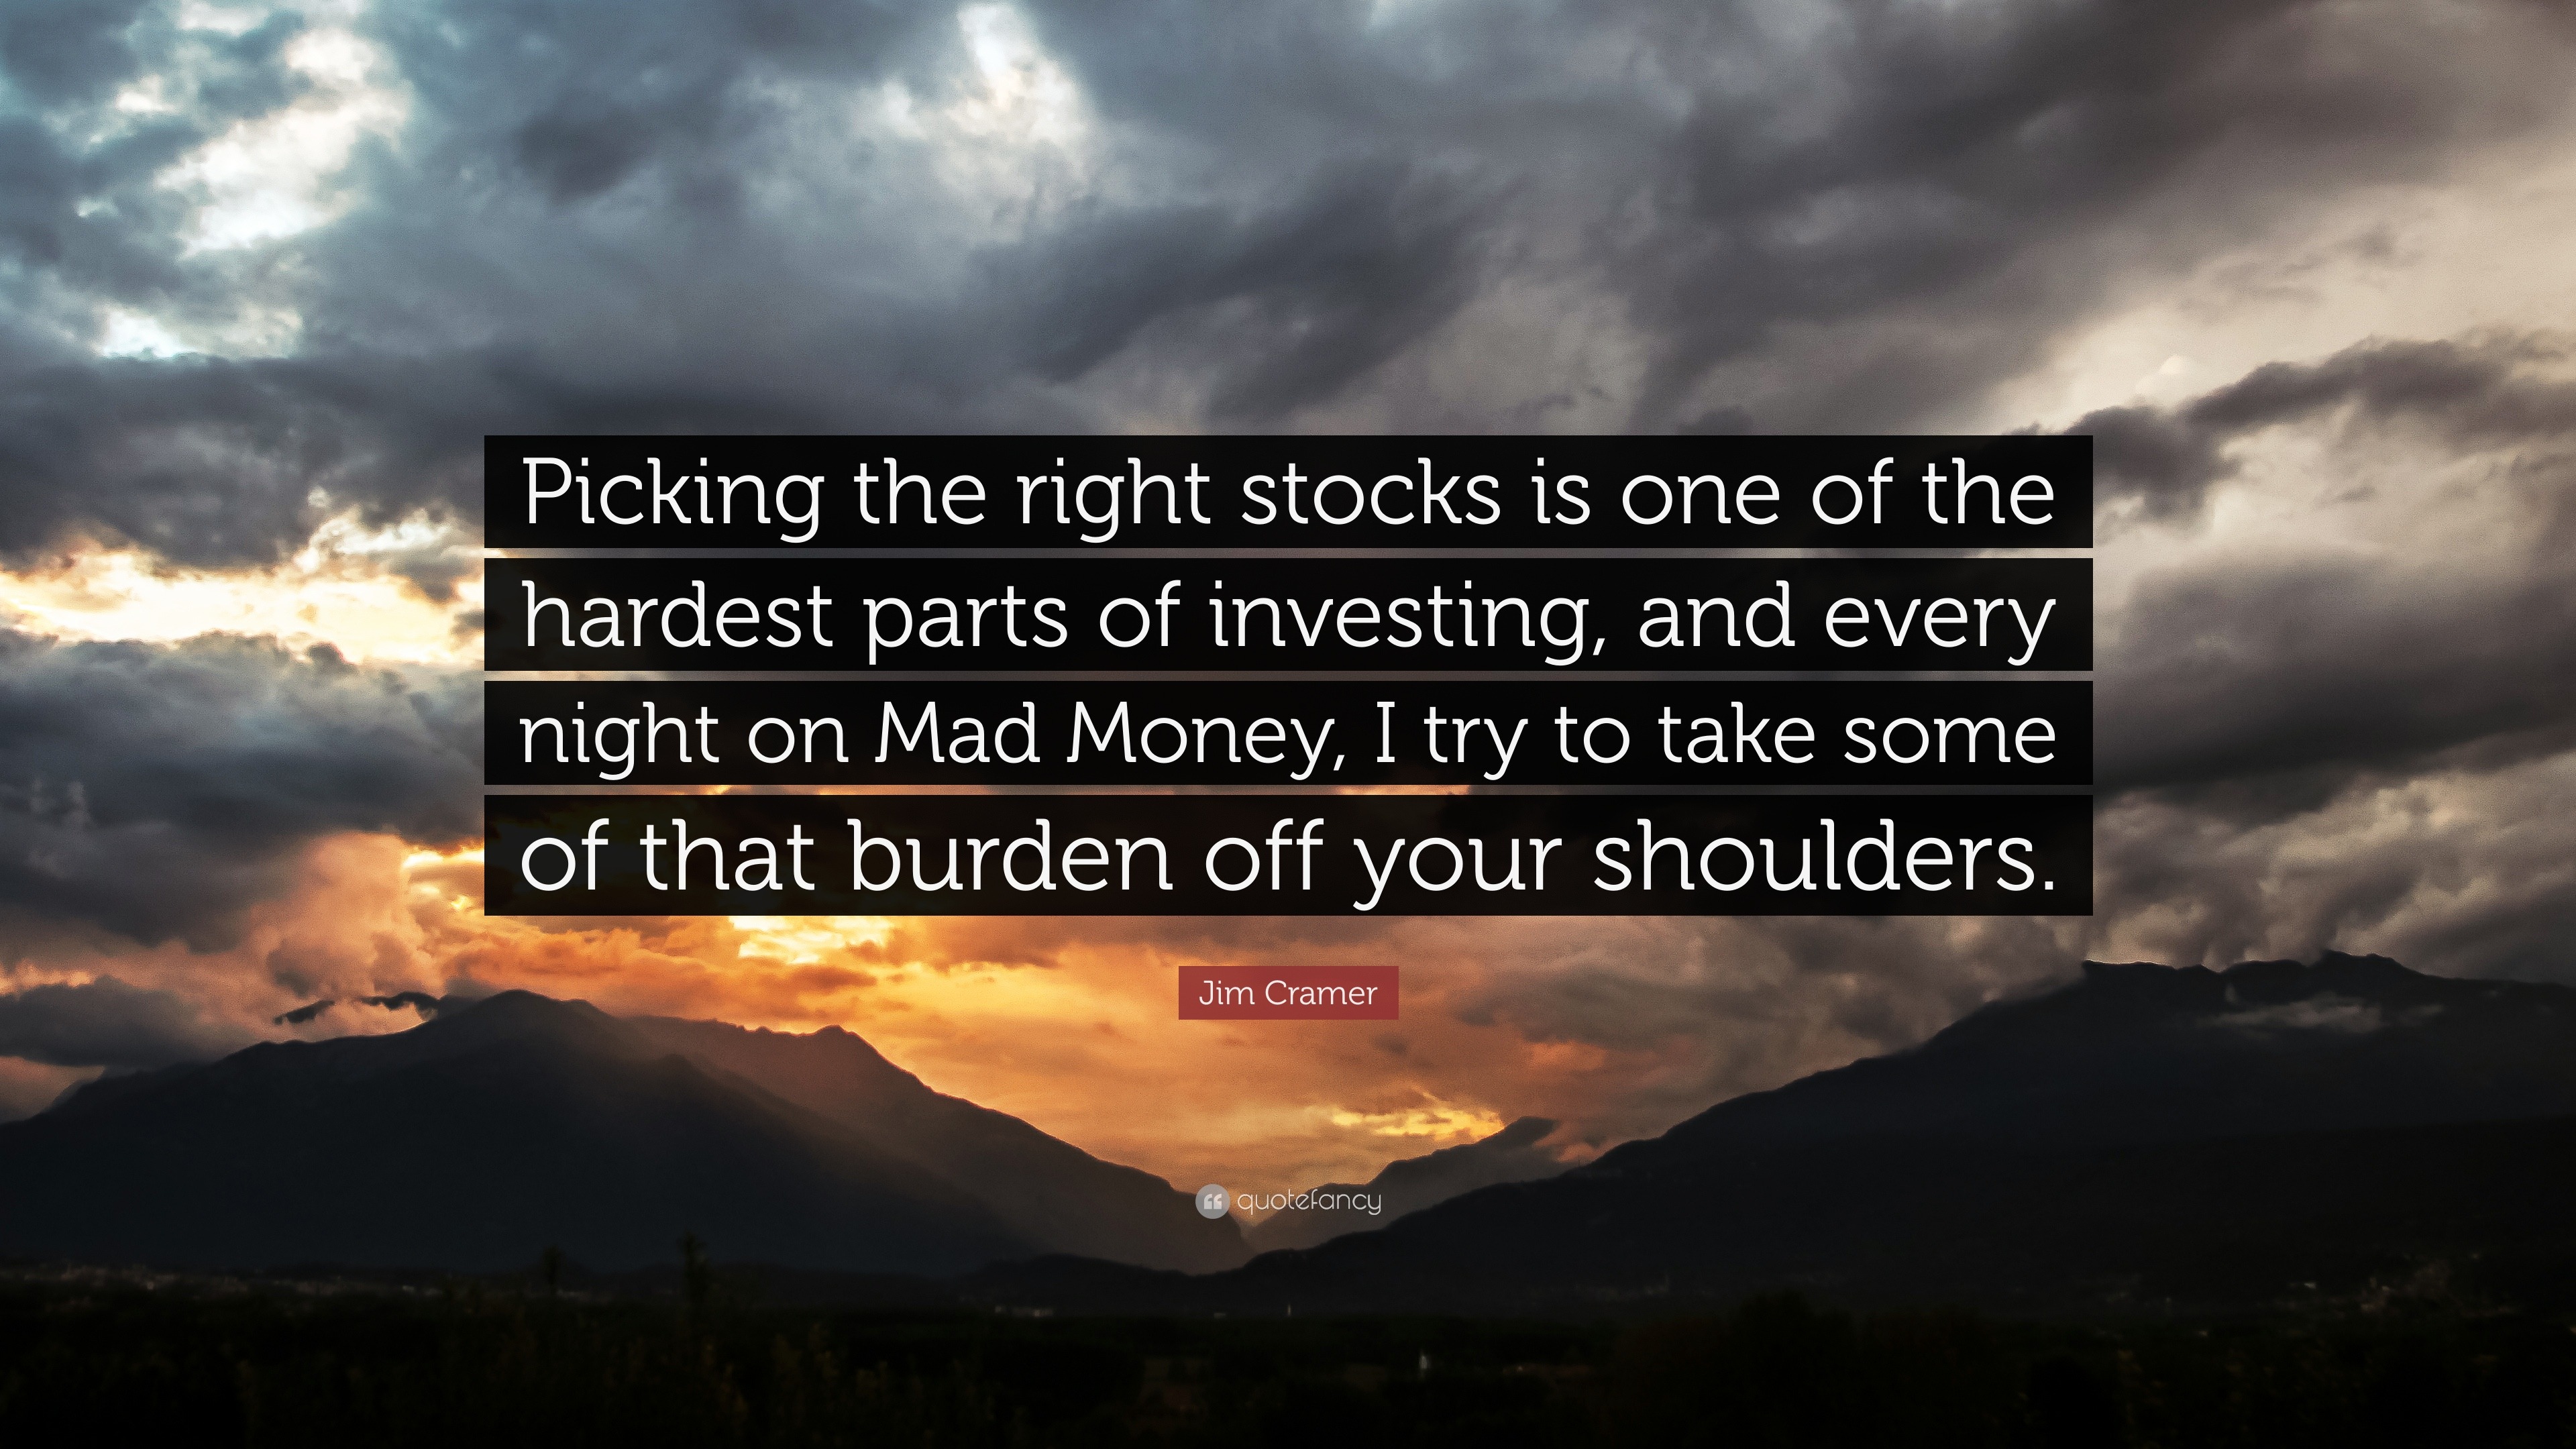 Jim Cramer Quote: “Picking the right stocks is one of the hardest parts of  investing, and every night on Mad Money, I try to take some of t...”